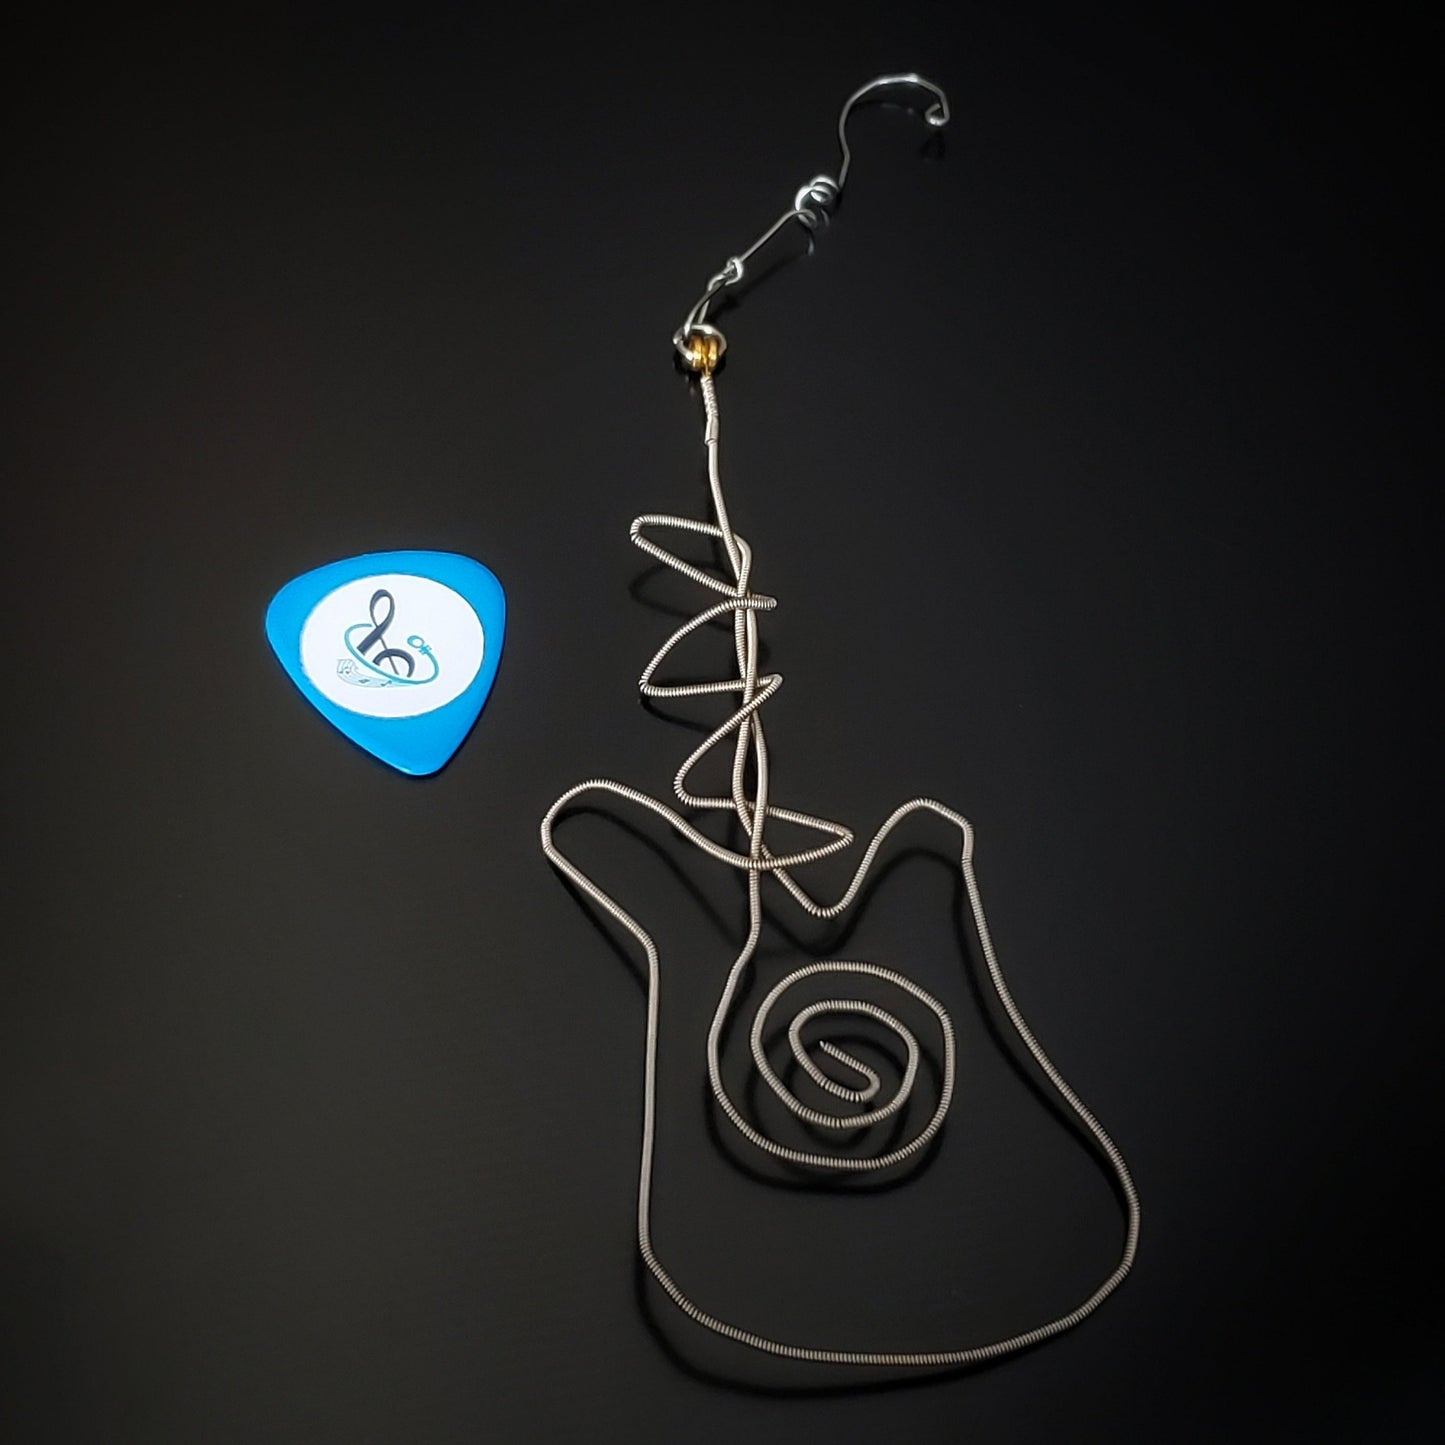 Christmas decoration in the shape of a guitar made from an upcycled guitar string next to a blue guitar pick 